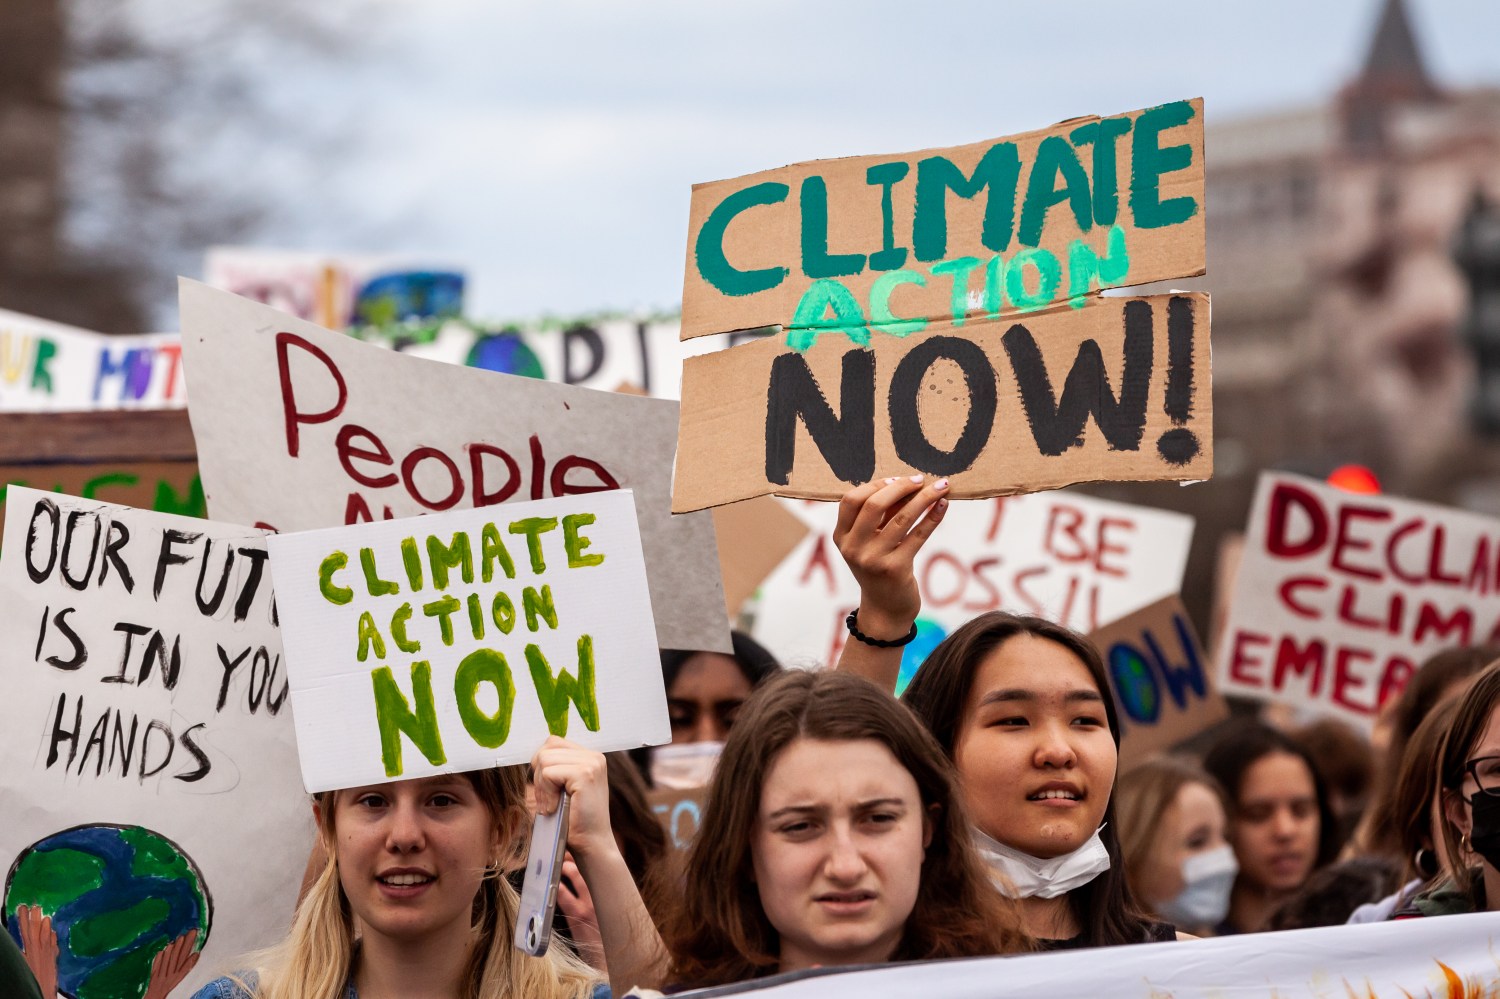 Protesters march to the Capitol during a strike against climate change by the youth-led organization, Fridays for Future.  This event was one of many held worldwide March 25 by FFF, the global organization begun by Greta Thunberg in 2018.  Protesters are demanding policymakers and the private sector take action against the climate crisis and reparations for the ordinary people - primarily in the global south - who have been hurt most by the practices responsible for climate change. (Photo by Allison Bailey/NurPhoto)NO USE FRANCE